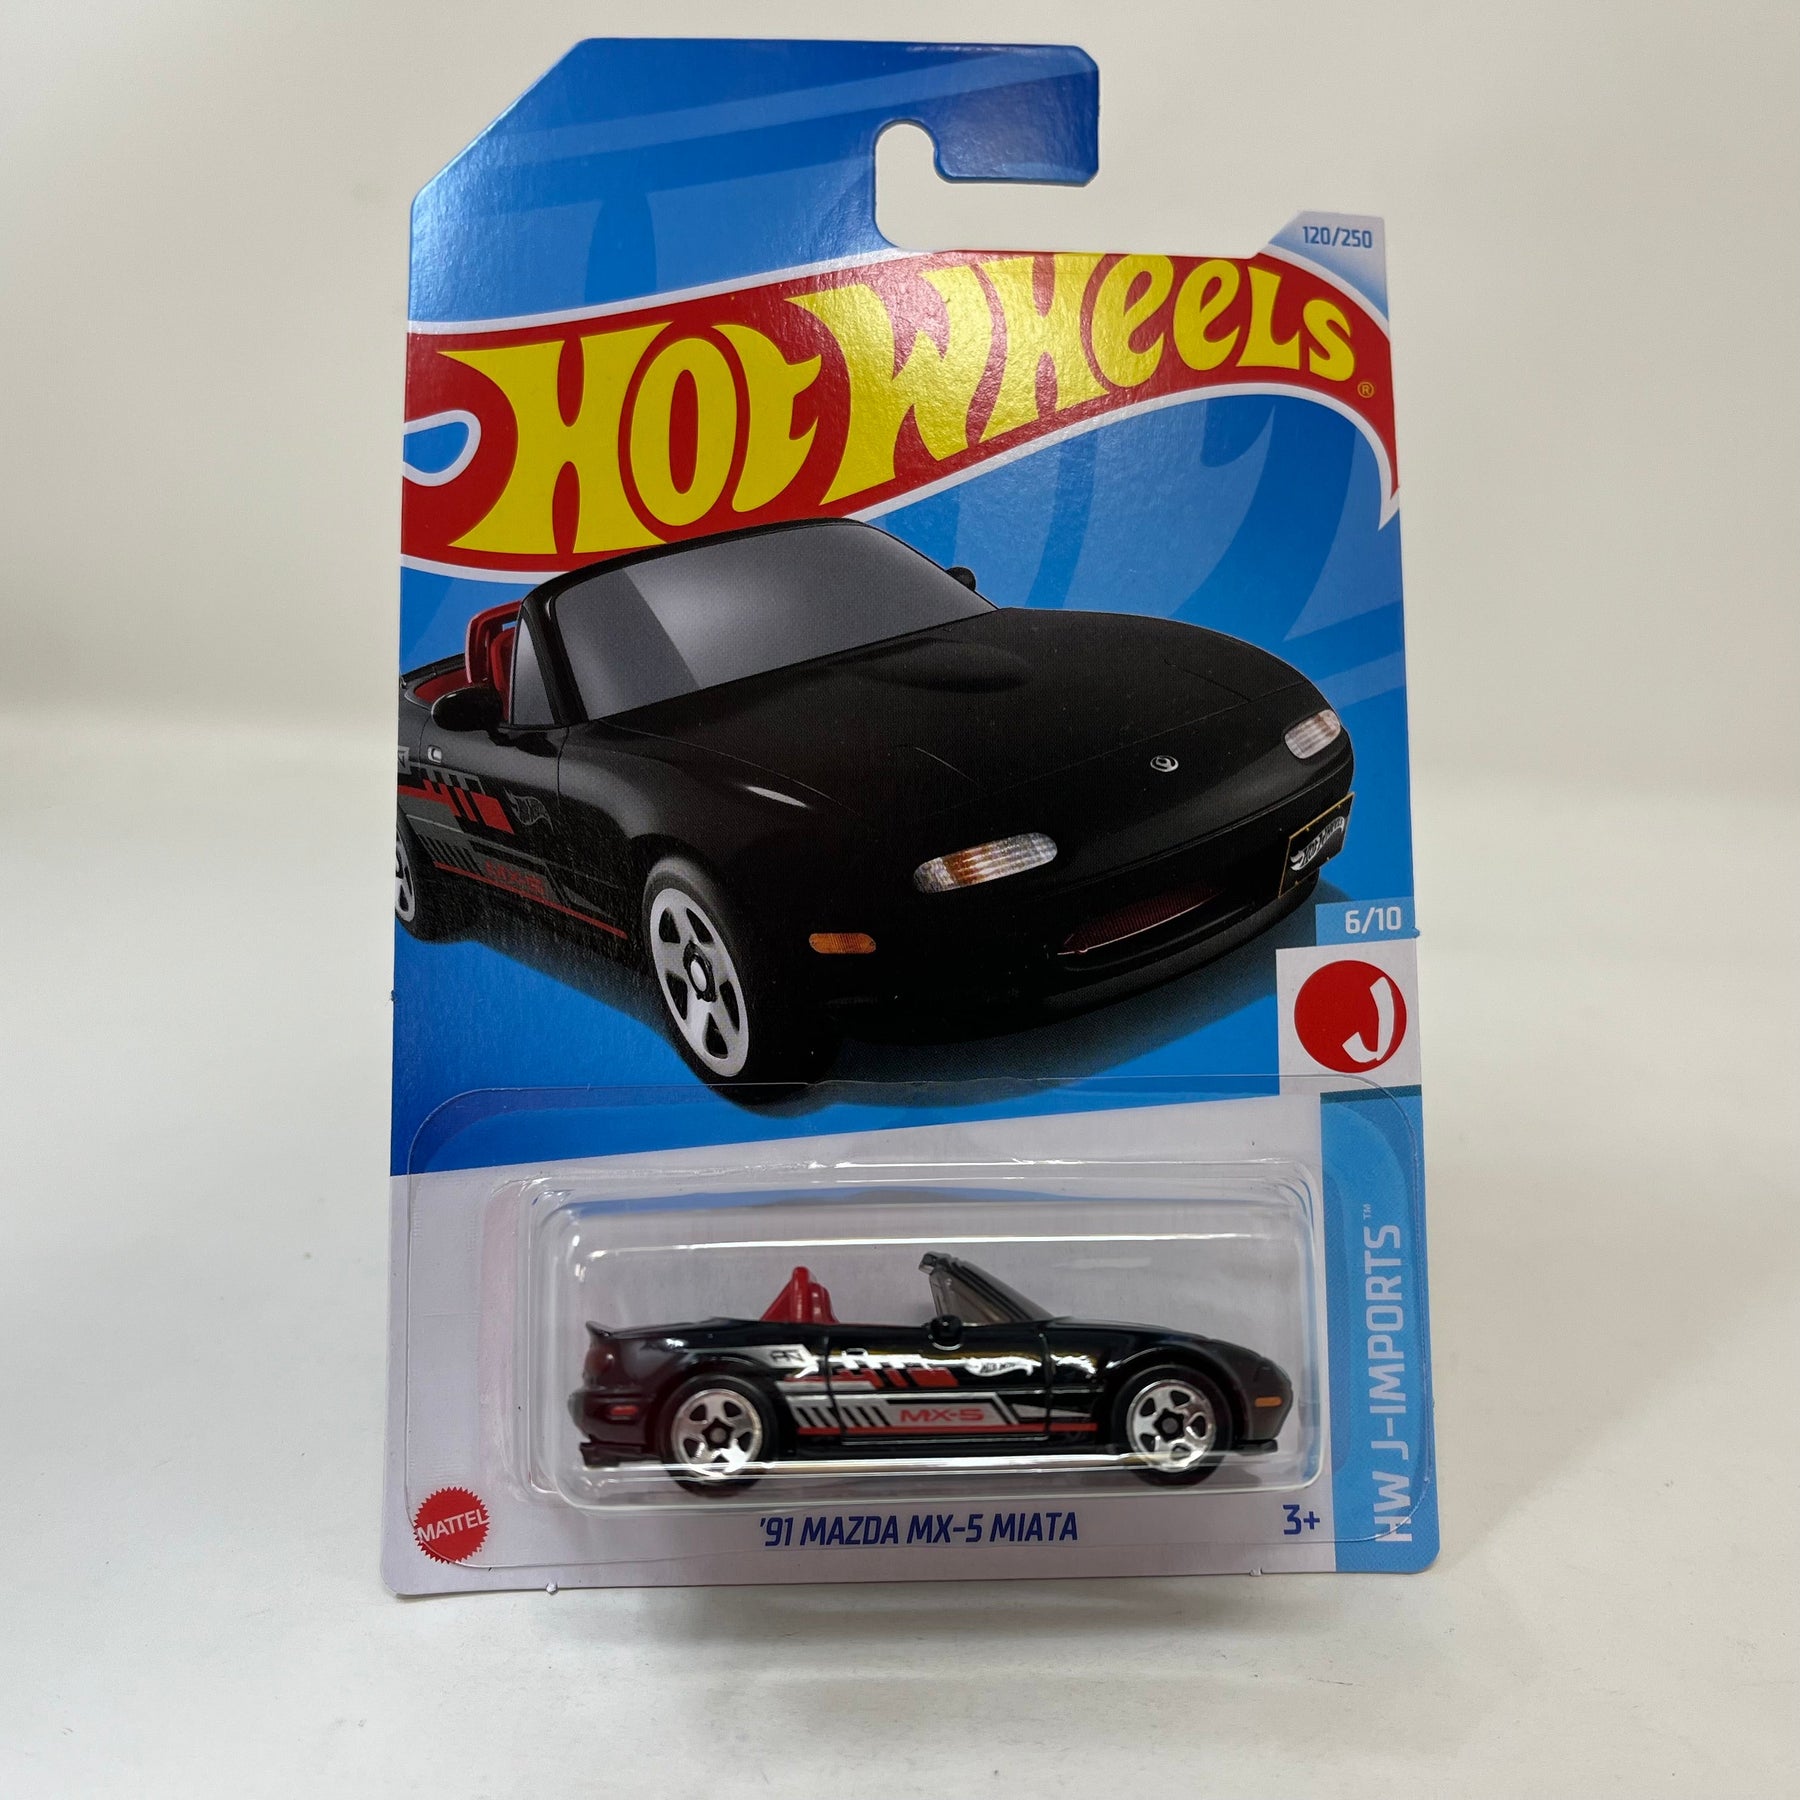 Opening 120 Hot Wheels Sports Cars! 